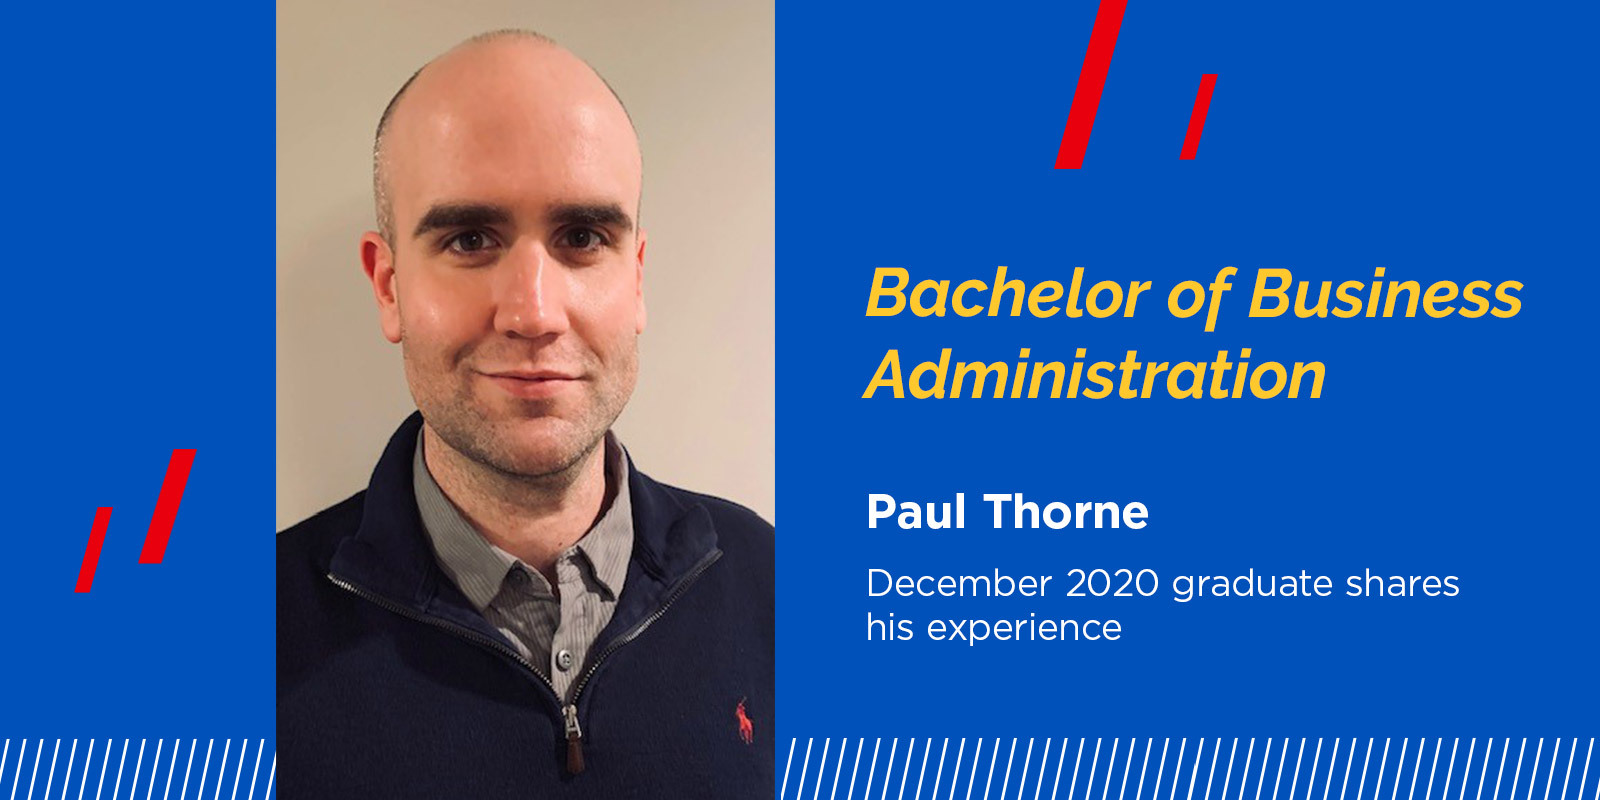 Bachelor of Business Administration, Paul Thorne, December 2020 graduate shares his experience